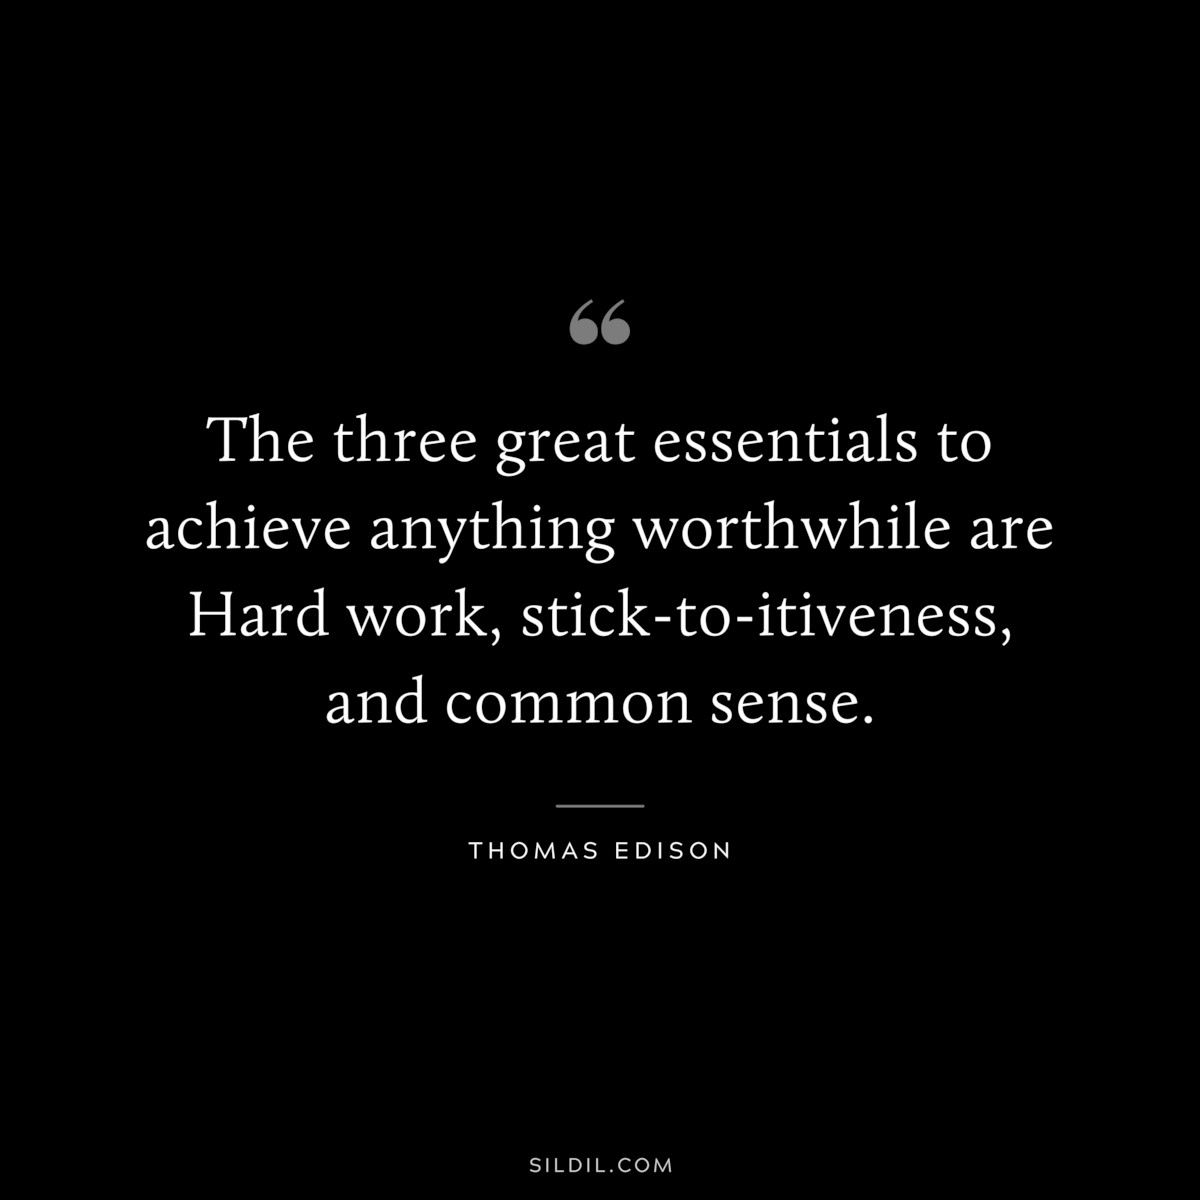 The three great essentials to achieve anything worthwhile are Hard work, stick-to-itiveness, and common sense. ― Thomas Edison